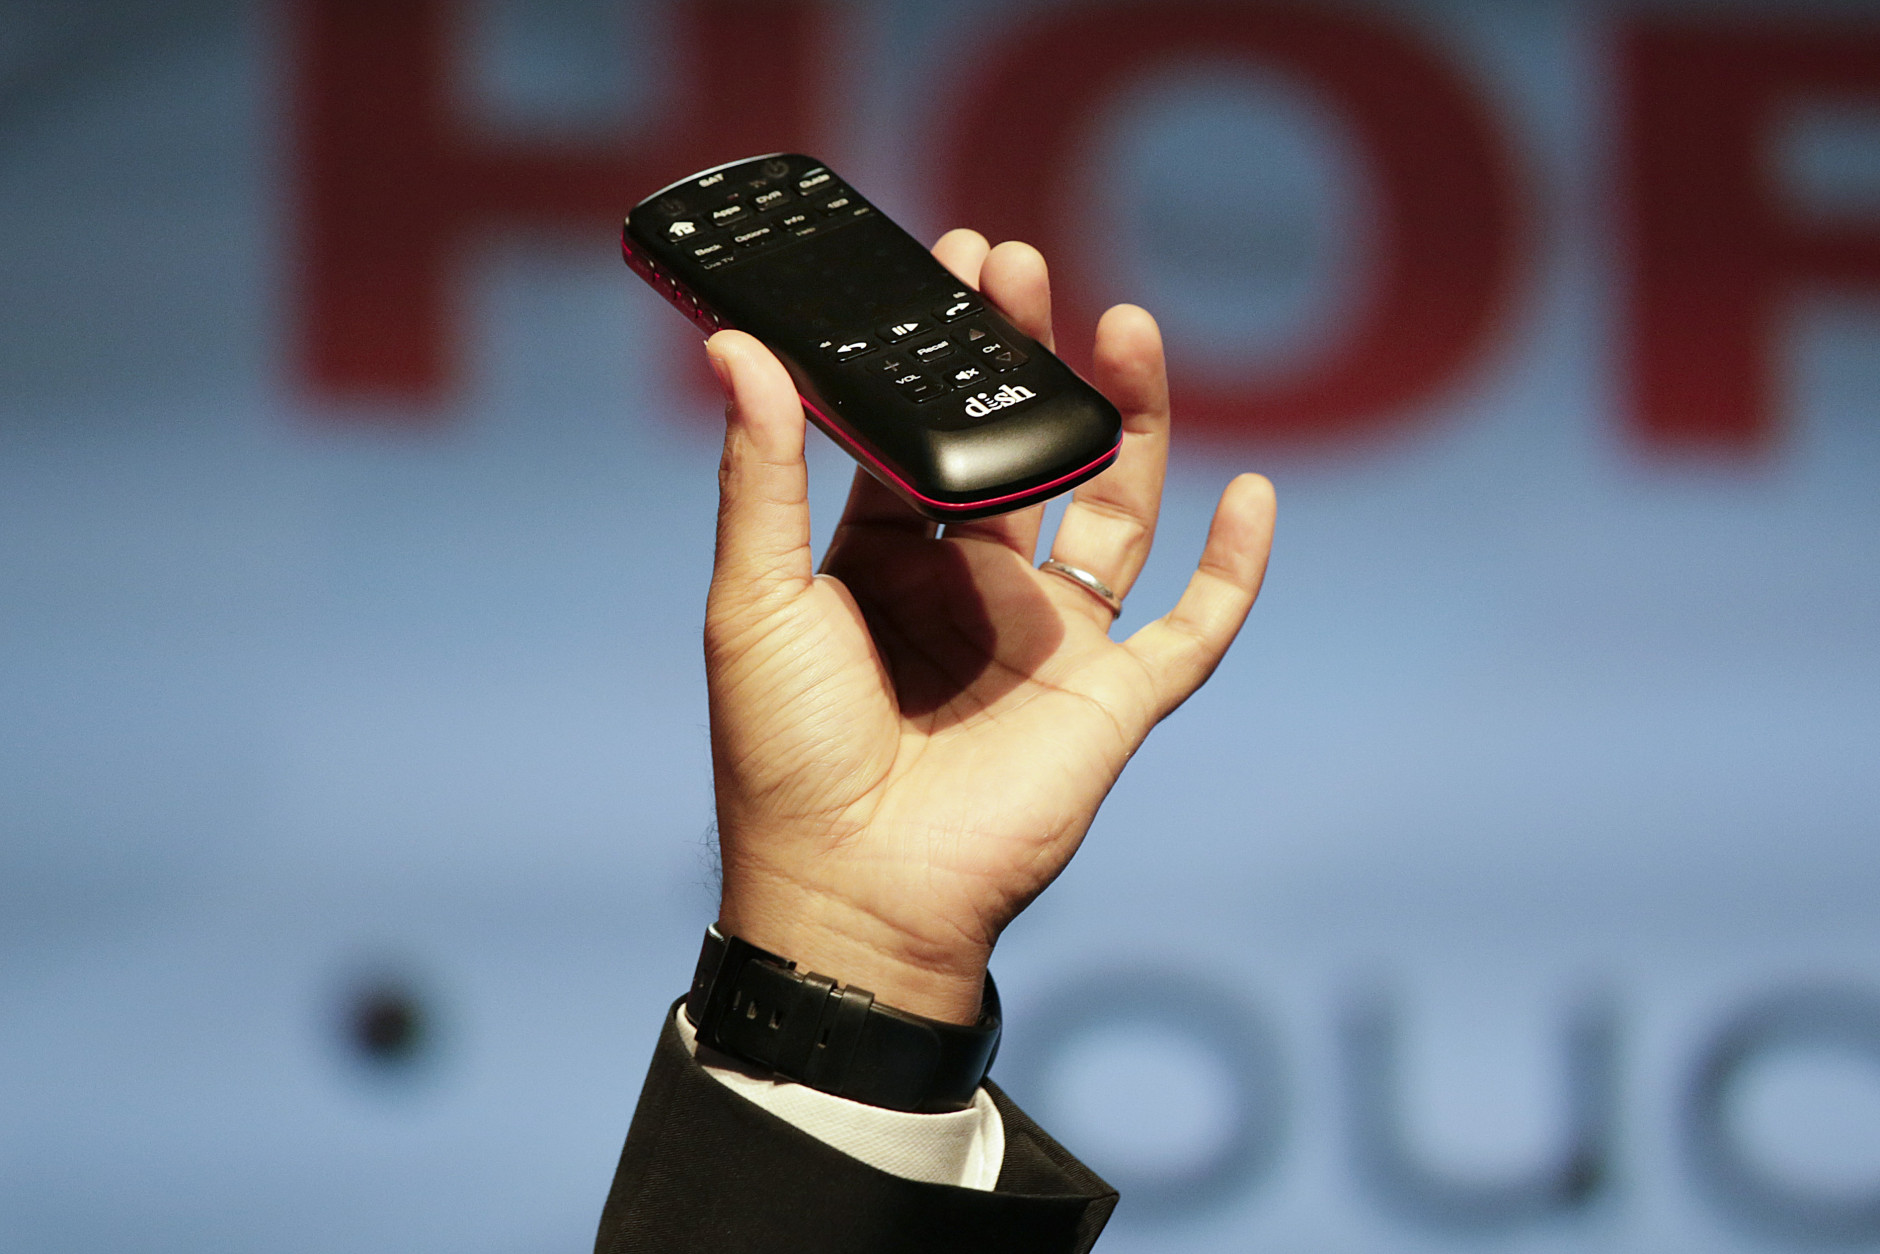 Vivek Khemka, senior vice president of product management at Dish, introduces the new Hopper voice remote during a news conference at the International CES, Monday, Jan. 5, 2015, in Las Vegas. (AP Photo/Jae C. Hong)